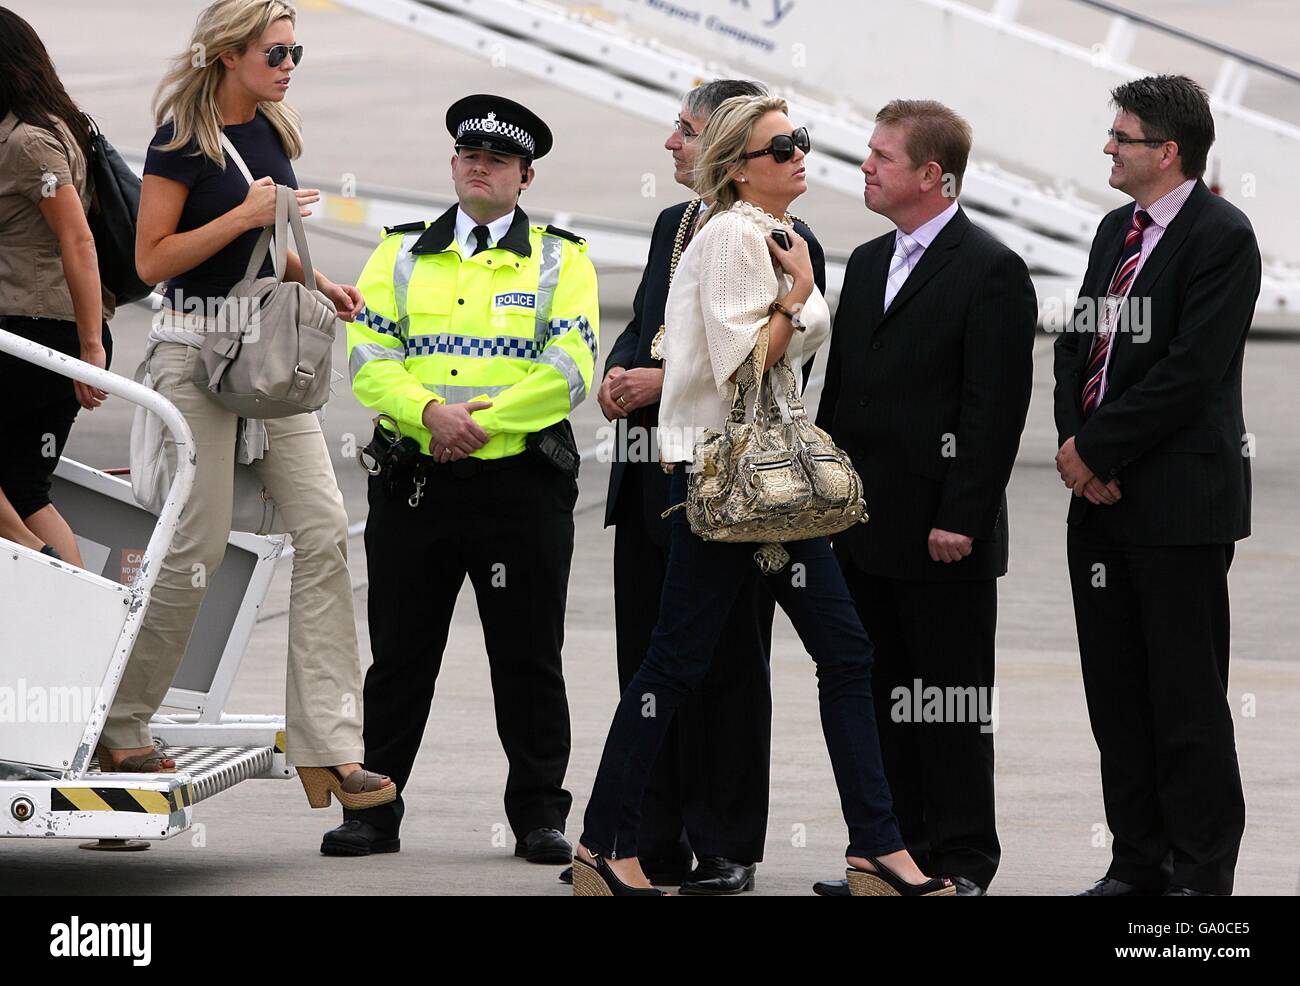 Alex Curran (right) Fiance of Liverpool's Steven Gerrard and Abigail Clancy Girlfriend of Liverpool's Peter Crouch arrives at Liverpool John Lennon Airpor Stock Photo